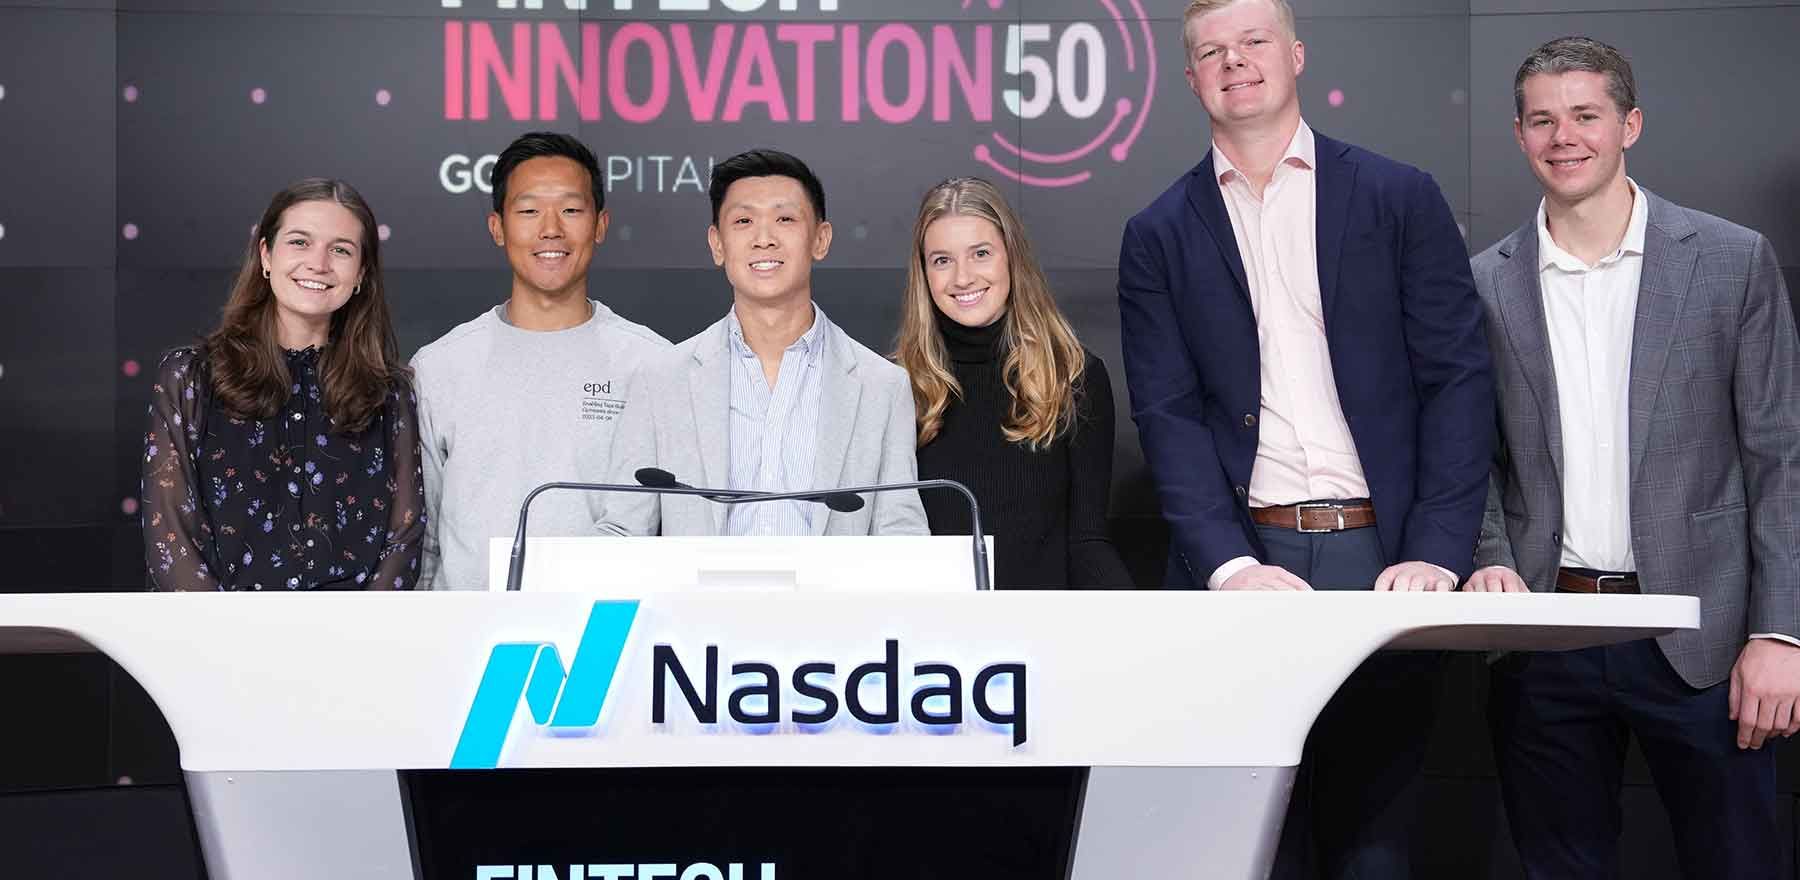 Finley named to 2024 Fintech Innovation 50 list by GGV Capital - Featured image